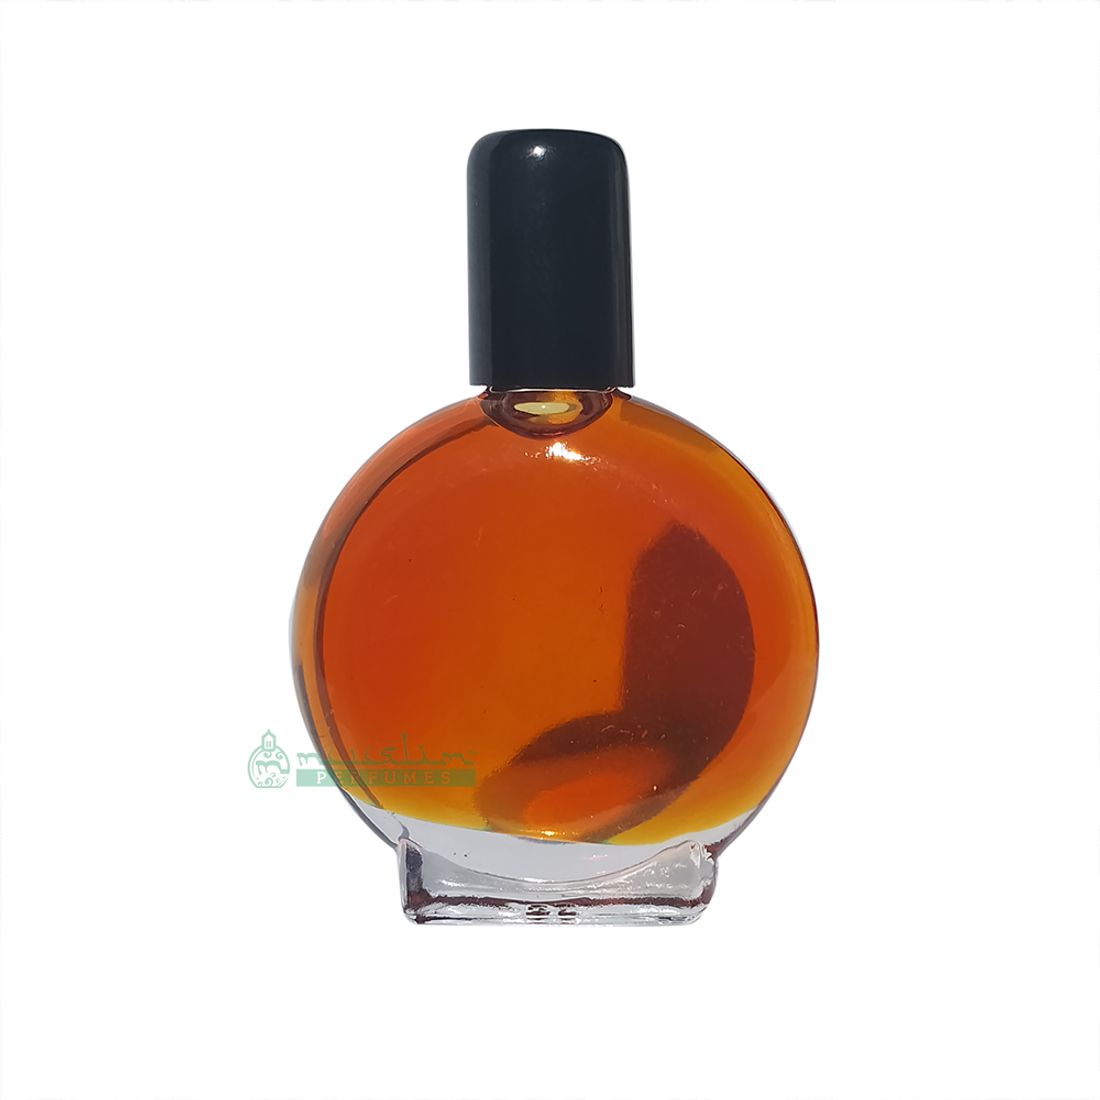 Shaykh Muhammad Thick Oil – Rich Brown Amber Translucent Color – Authentic Islamic Muslim Perfume in Flat Round 7mm Vial